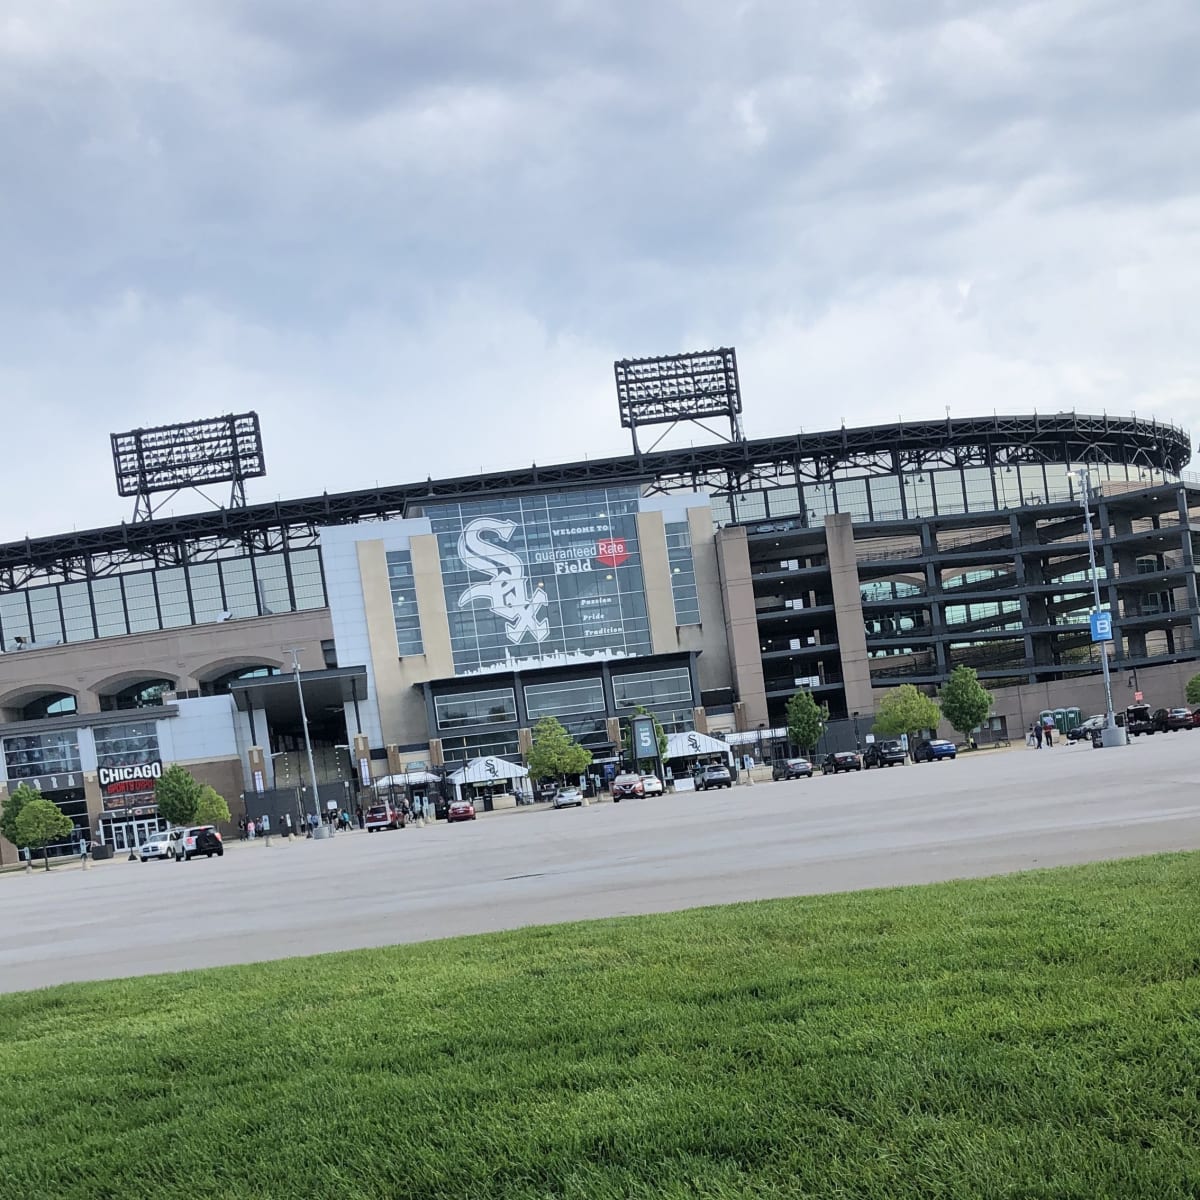 4 Chicago White Sox fans injured in hit-and-run outside Guaranteed Rate  Field